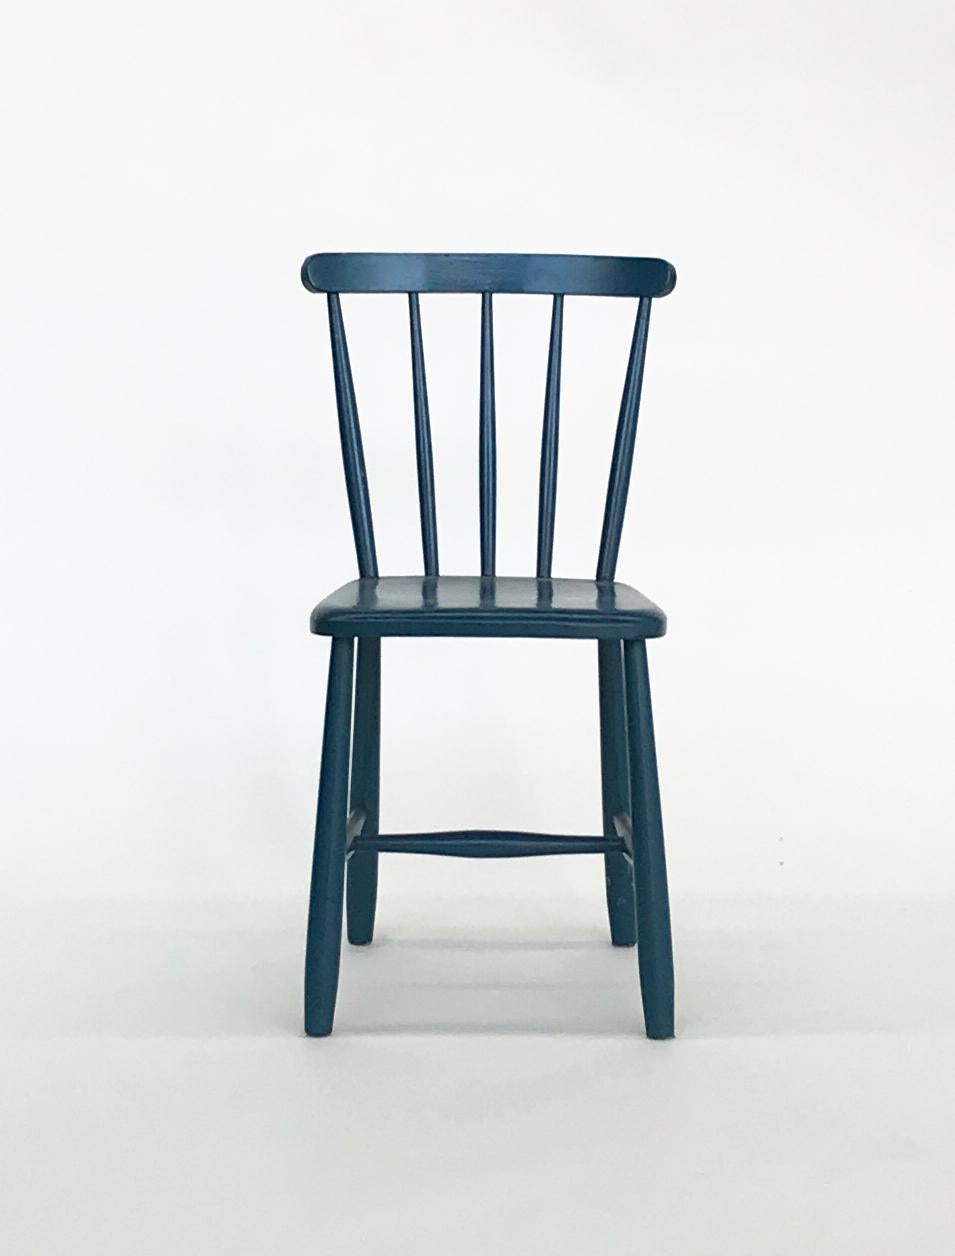 Set of four blue painted chairs.